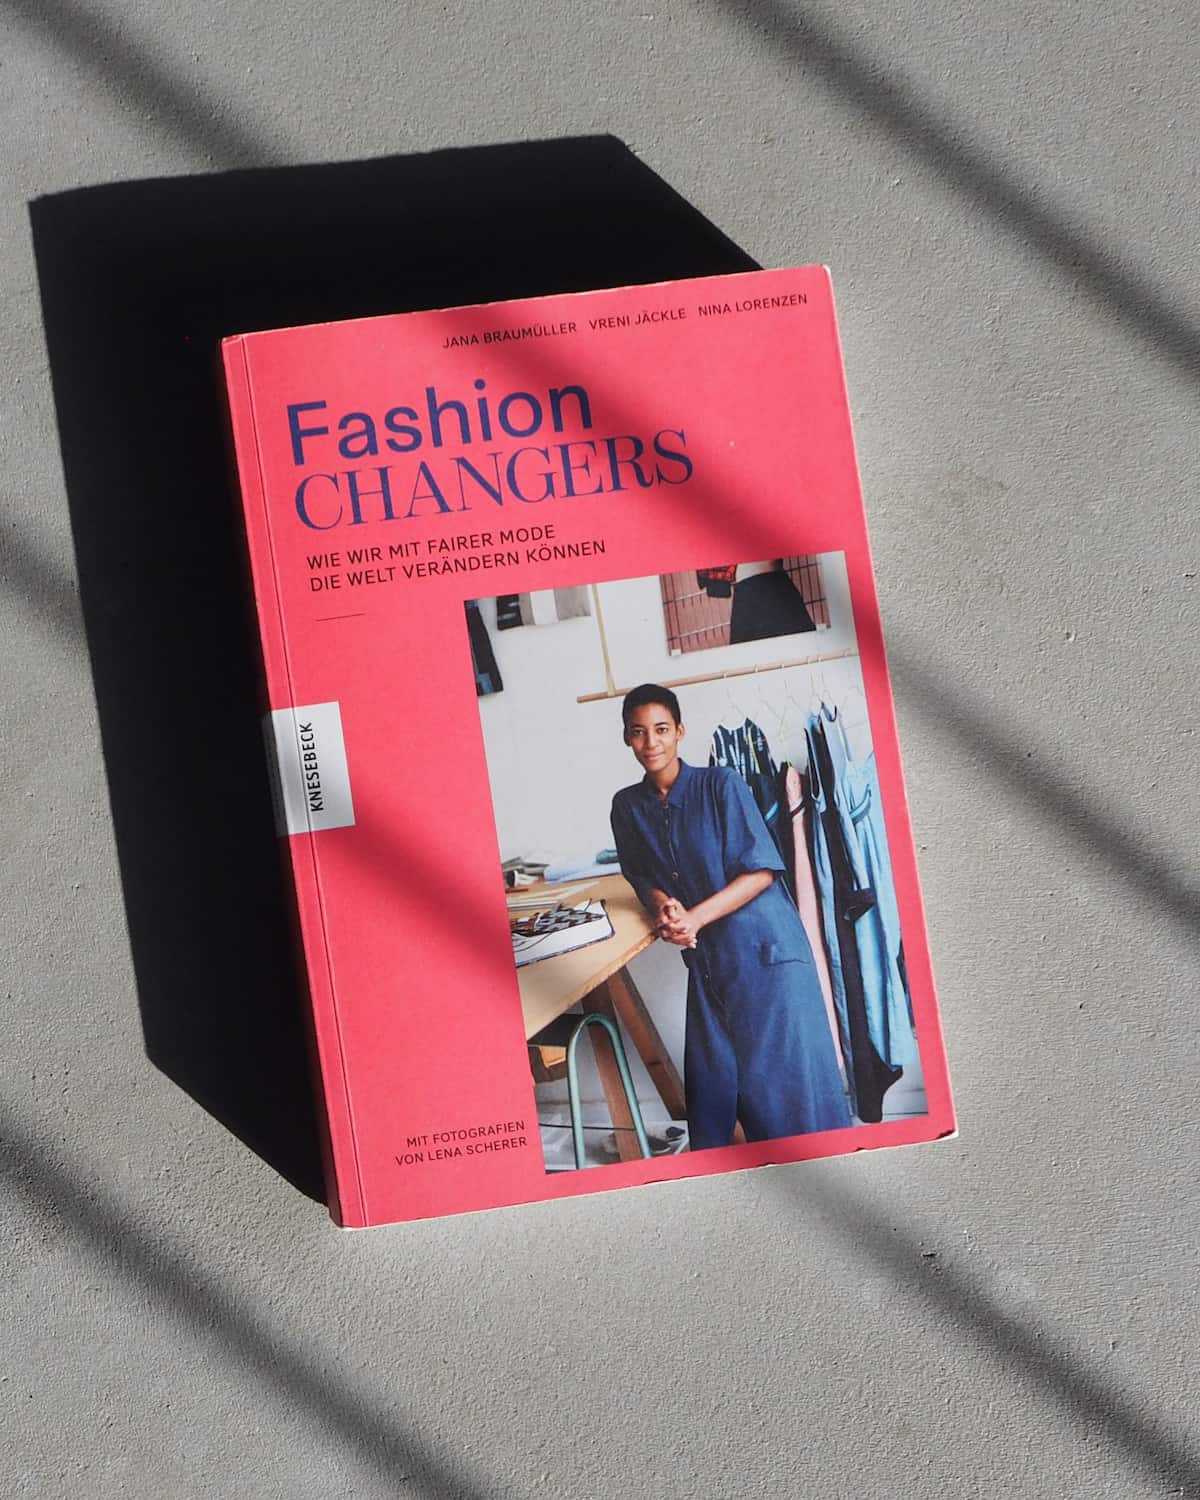 Fashion Chargers book